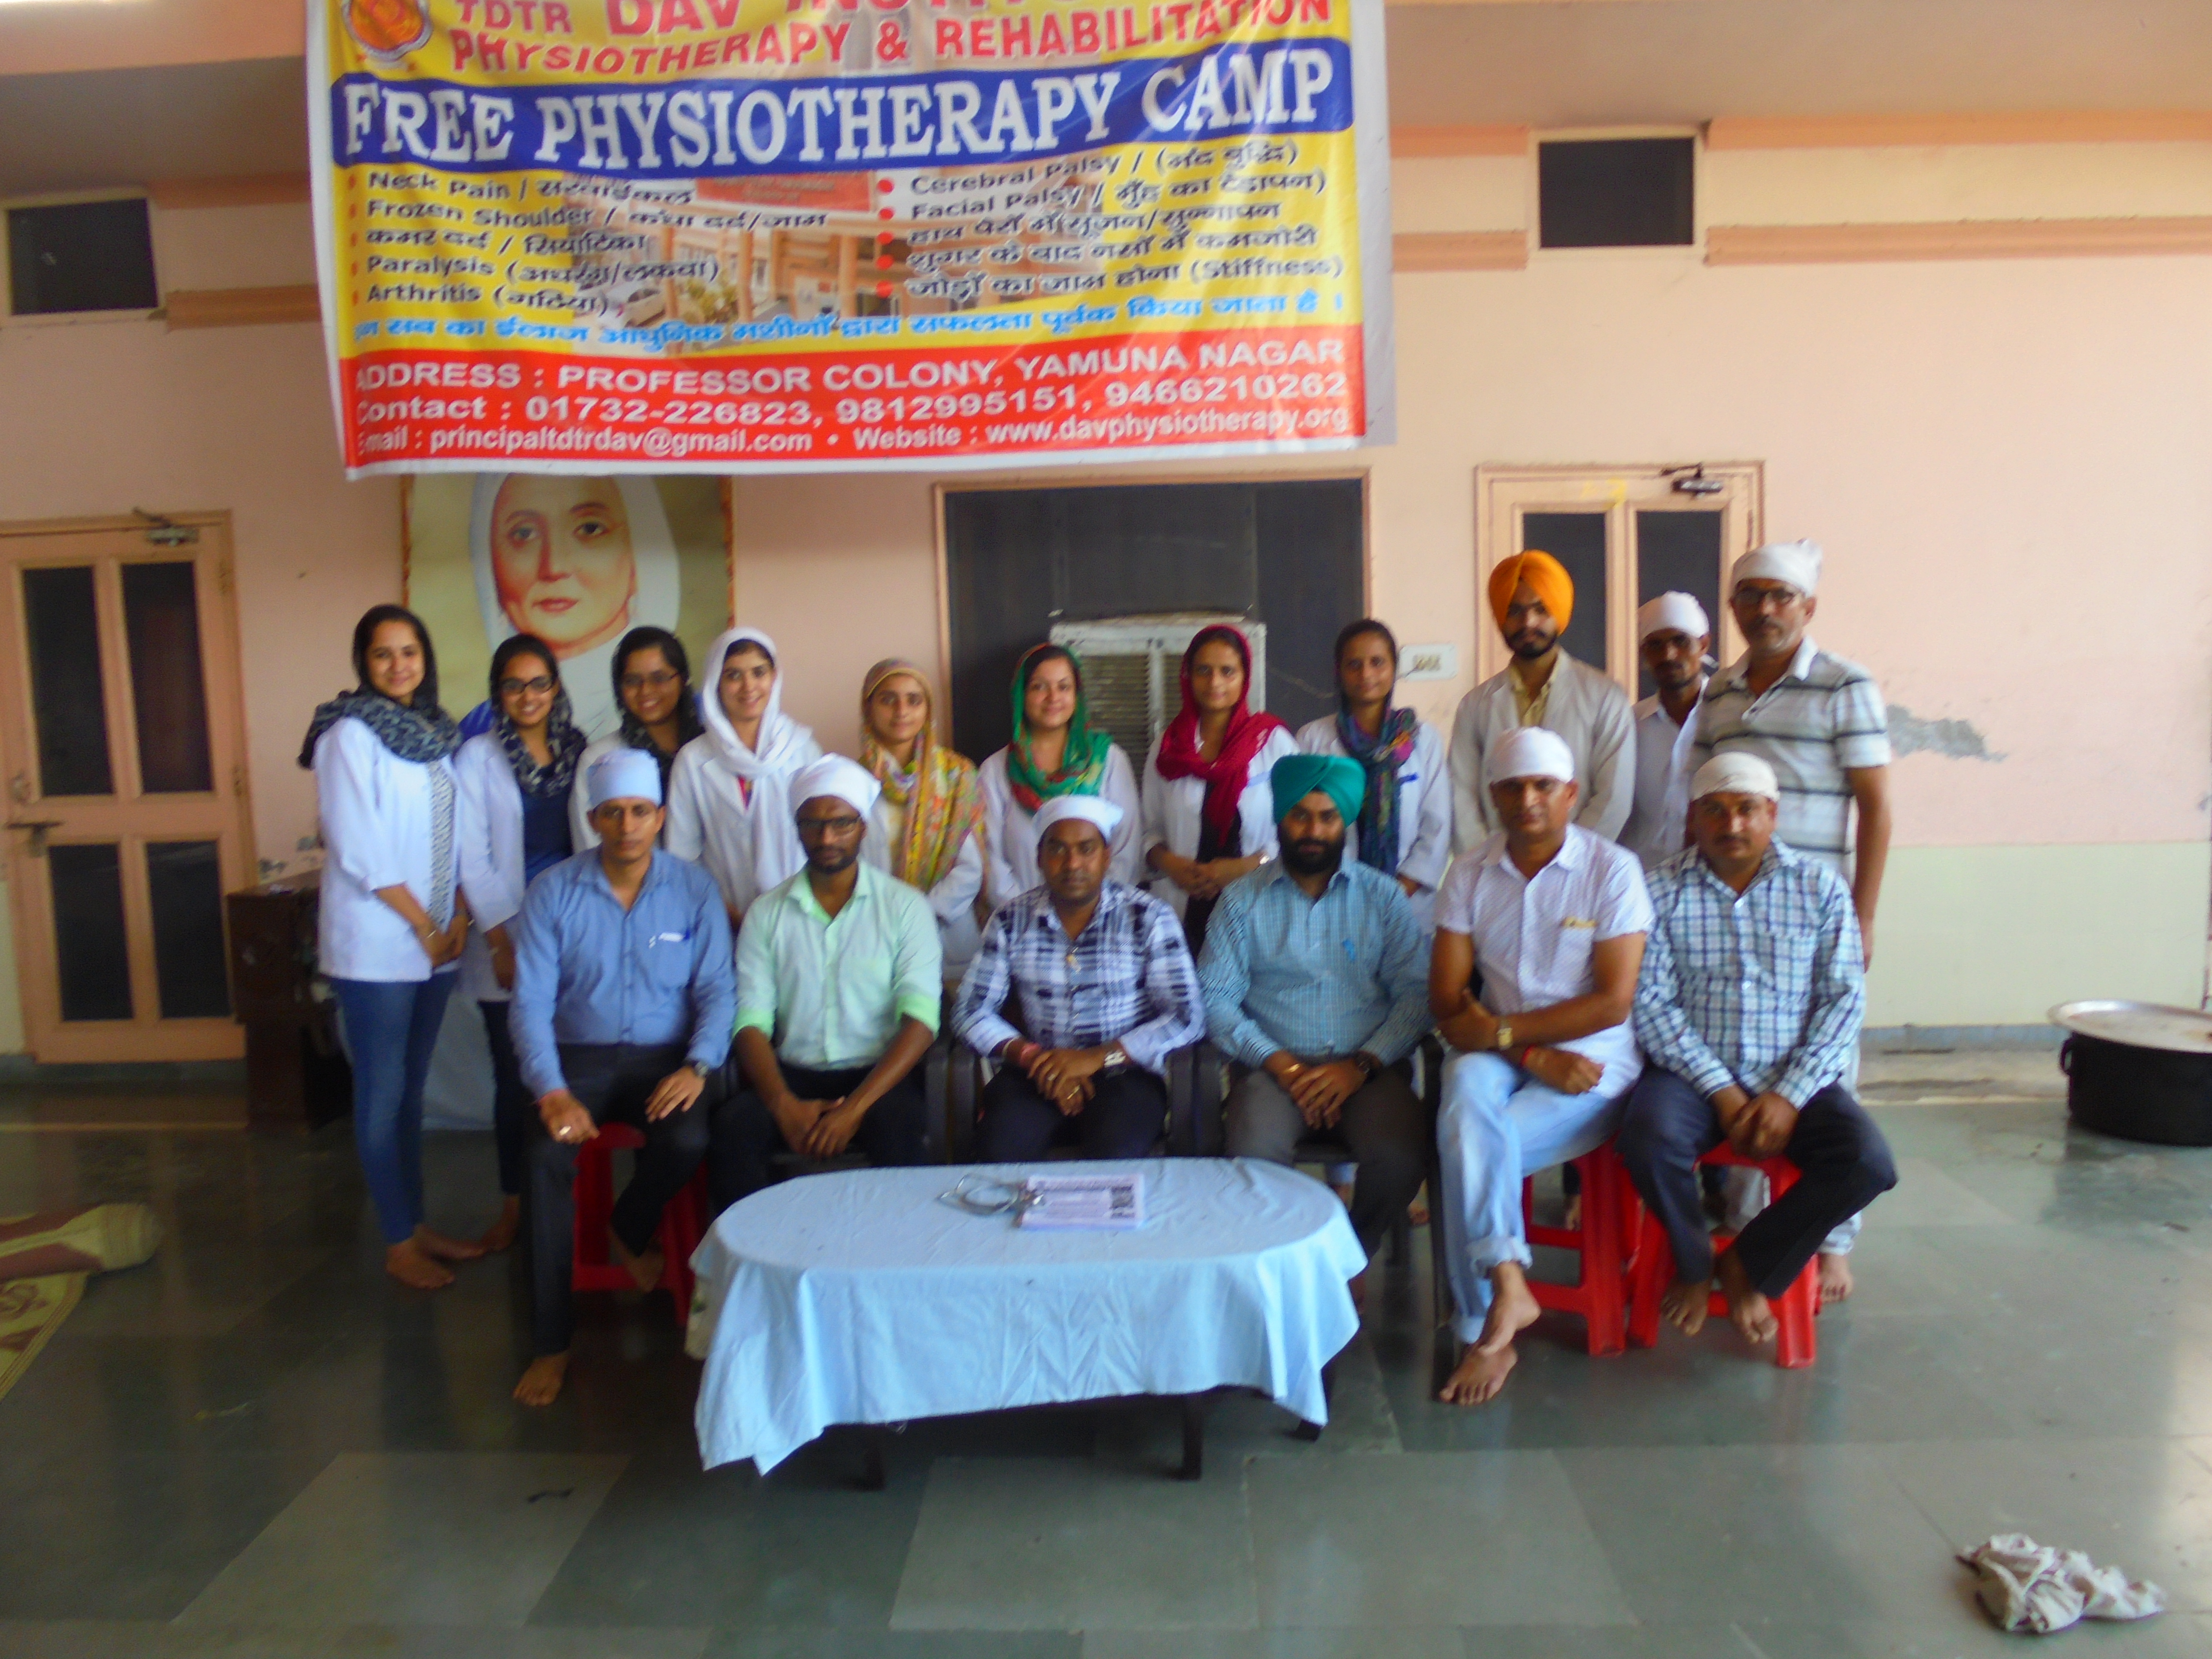 Fig. 15 Free Physiotherapy Camp